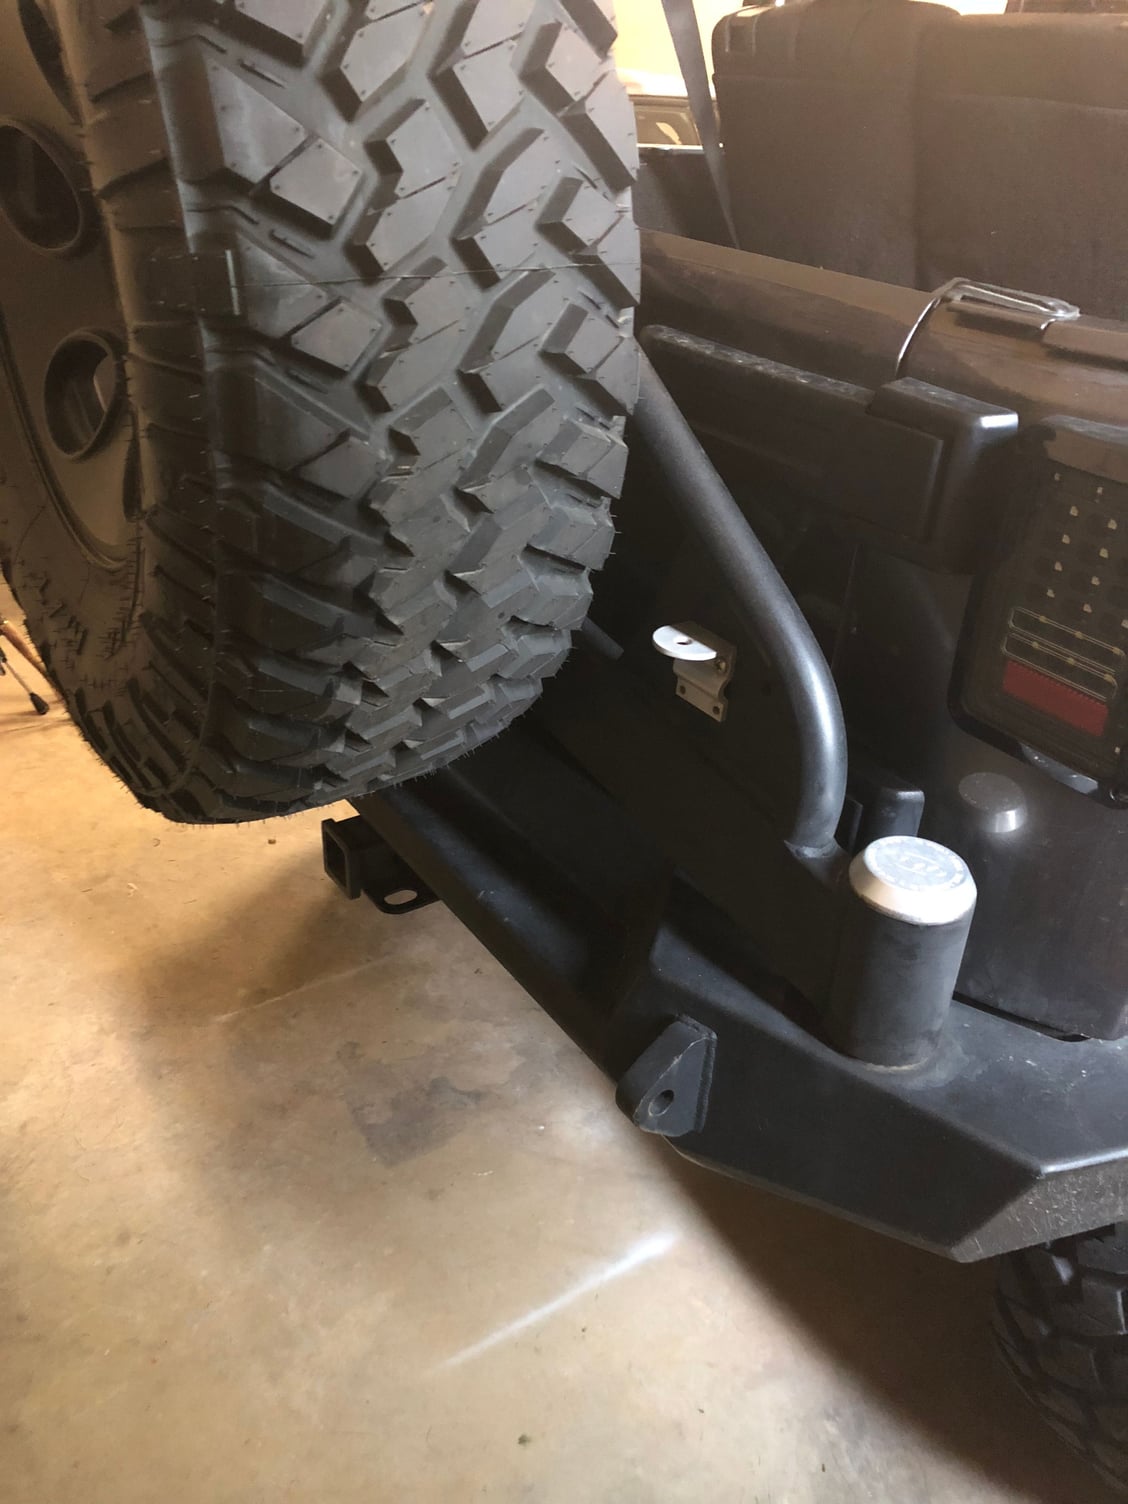 Exterior Body Parts - Expedition One Rear Bumper with Tire Carrier--$1000 OBO in KY - Used - 2007 to 2018 Jeep Wrangler - Louisville, KY 40245, United States